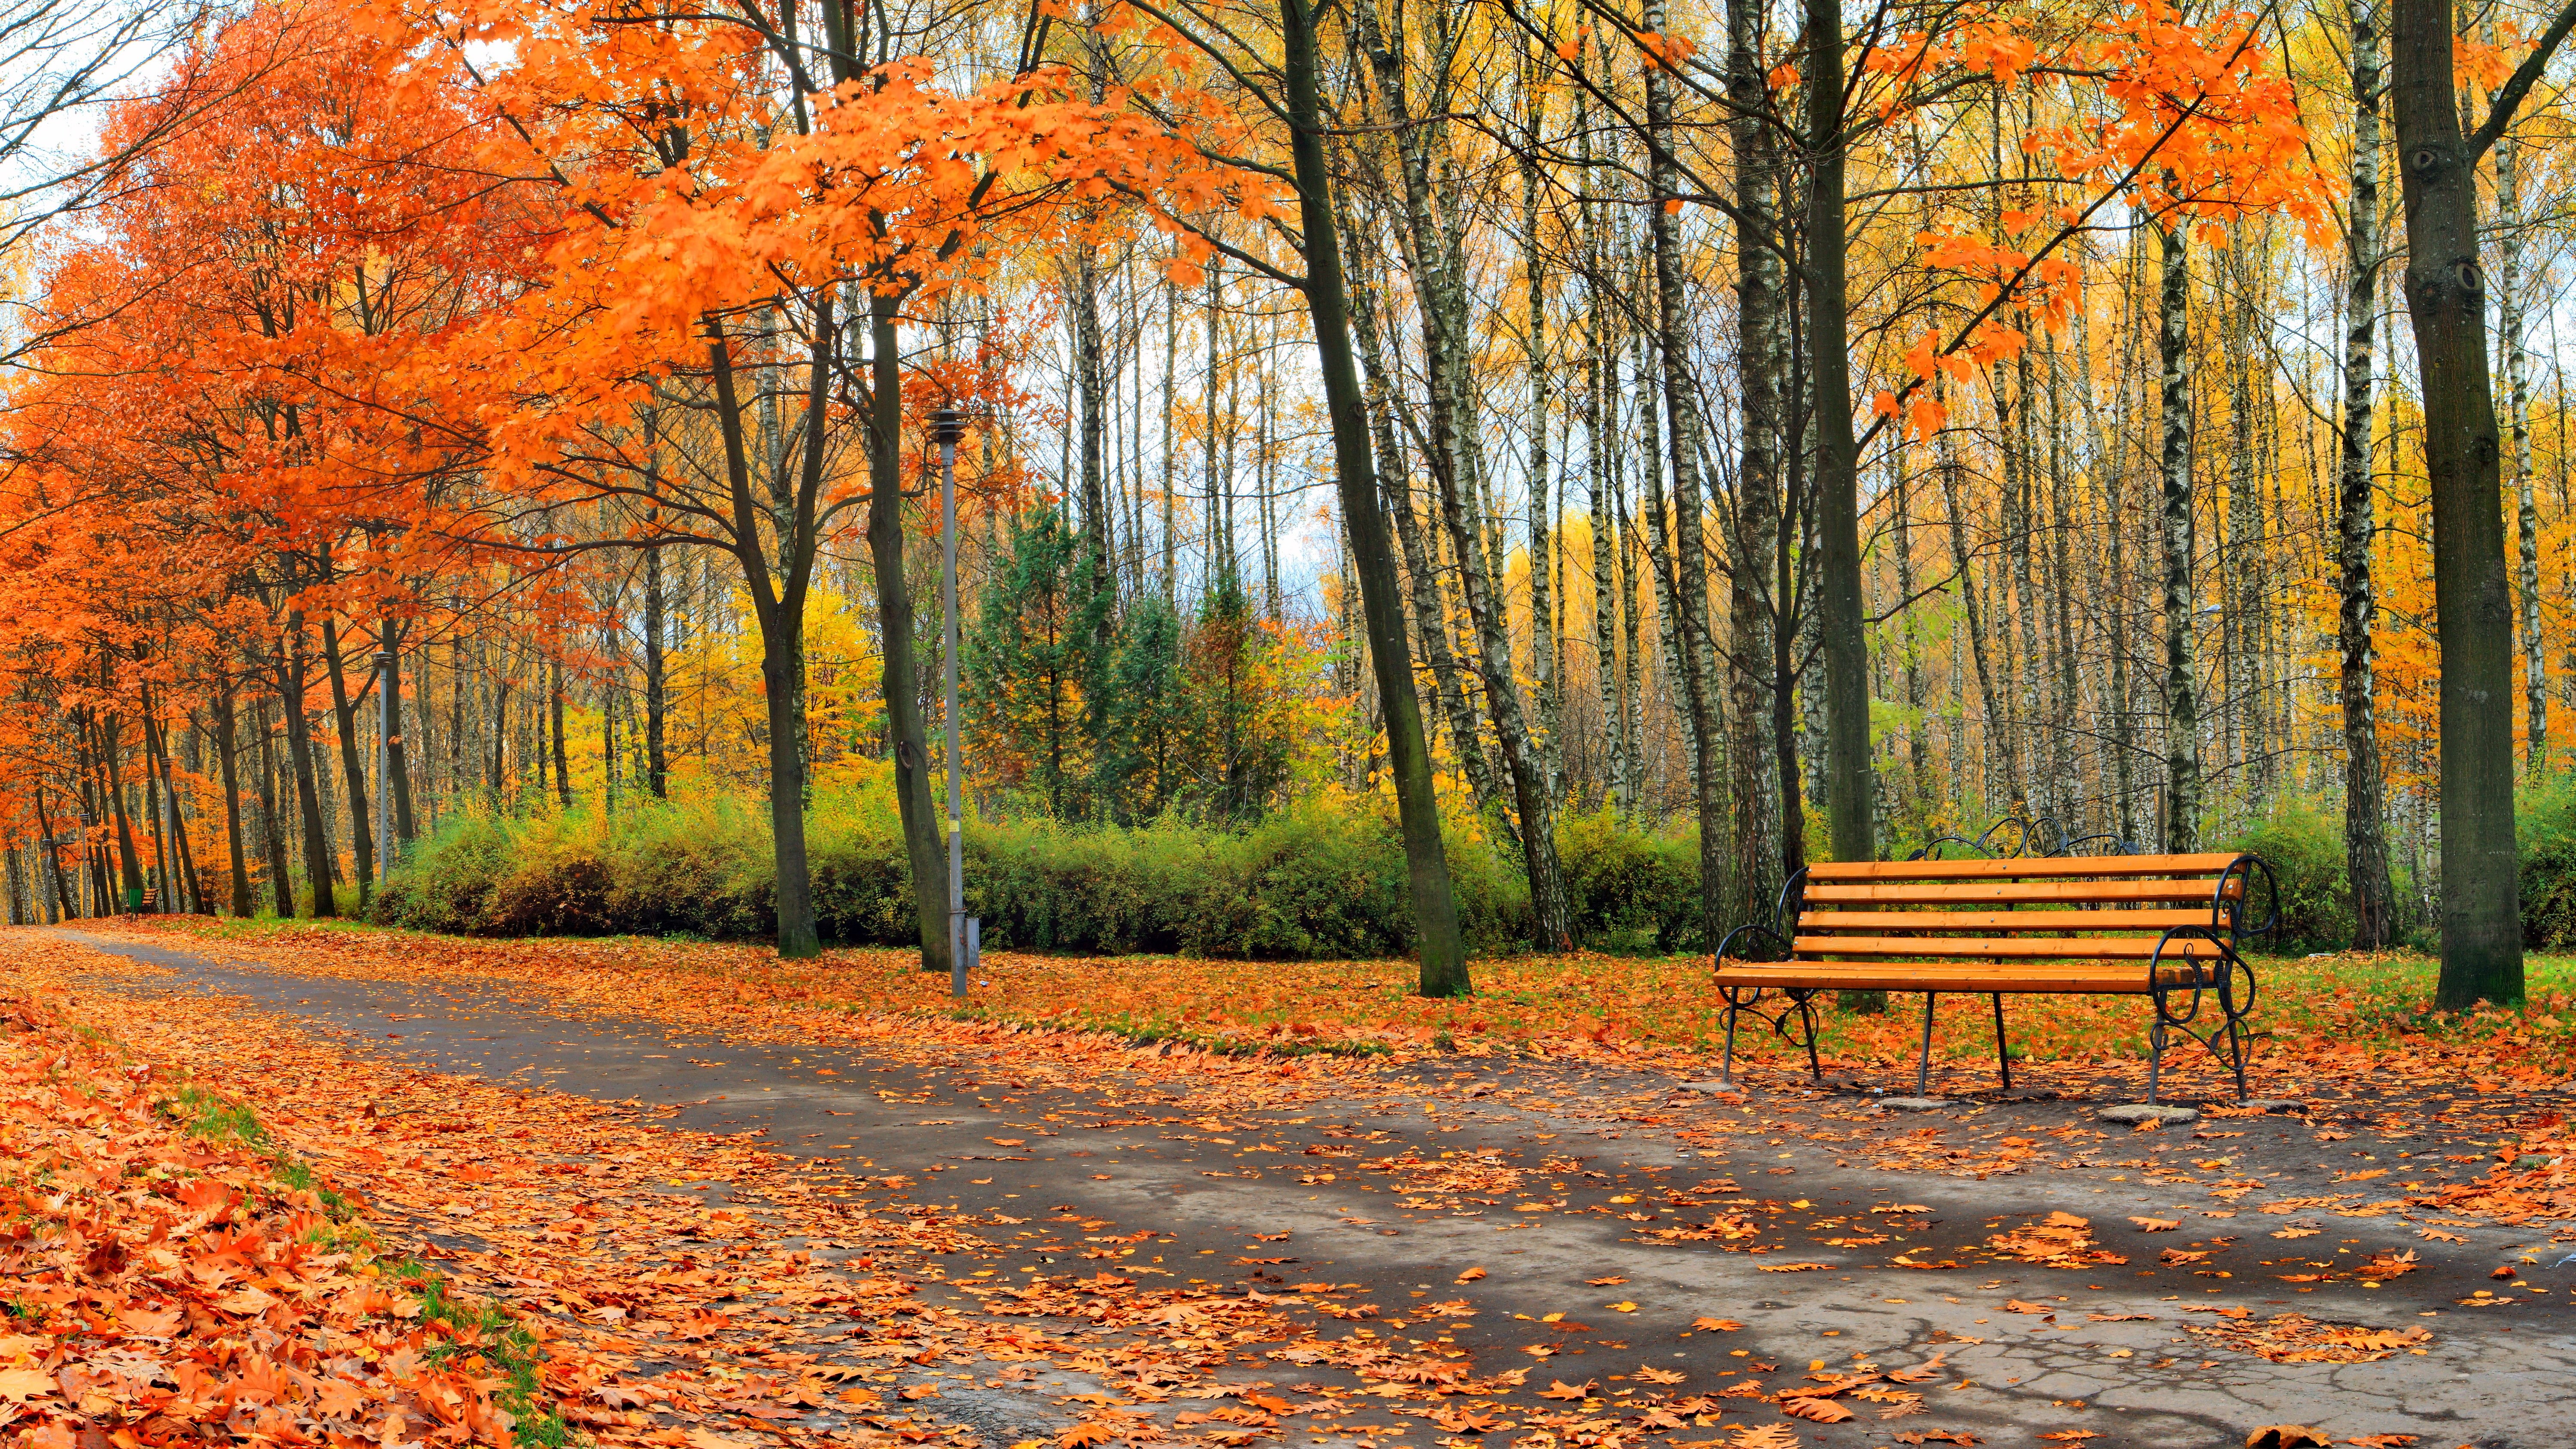 autumn-fall-landscape-nature-tree-forest-leaf-leaves-path-trail-bench-wallpapers-hd